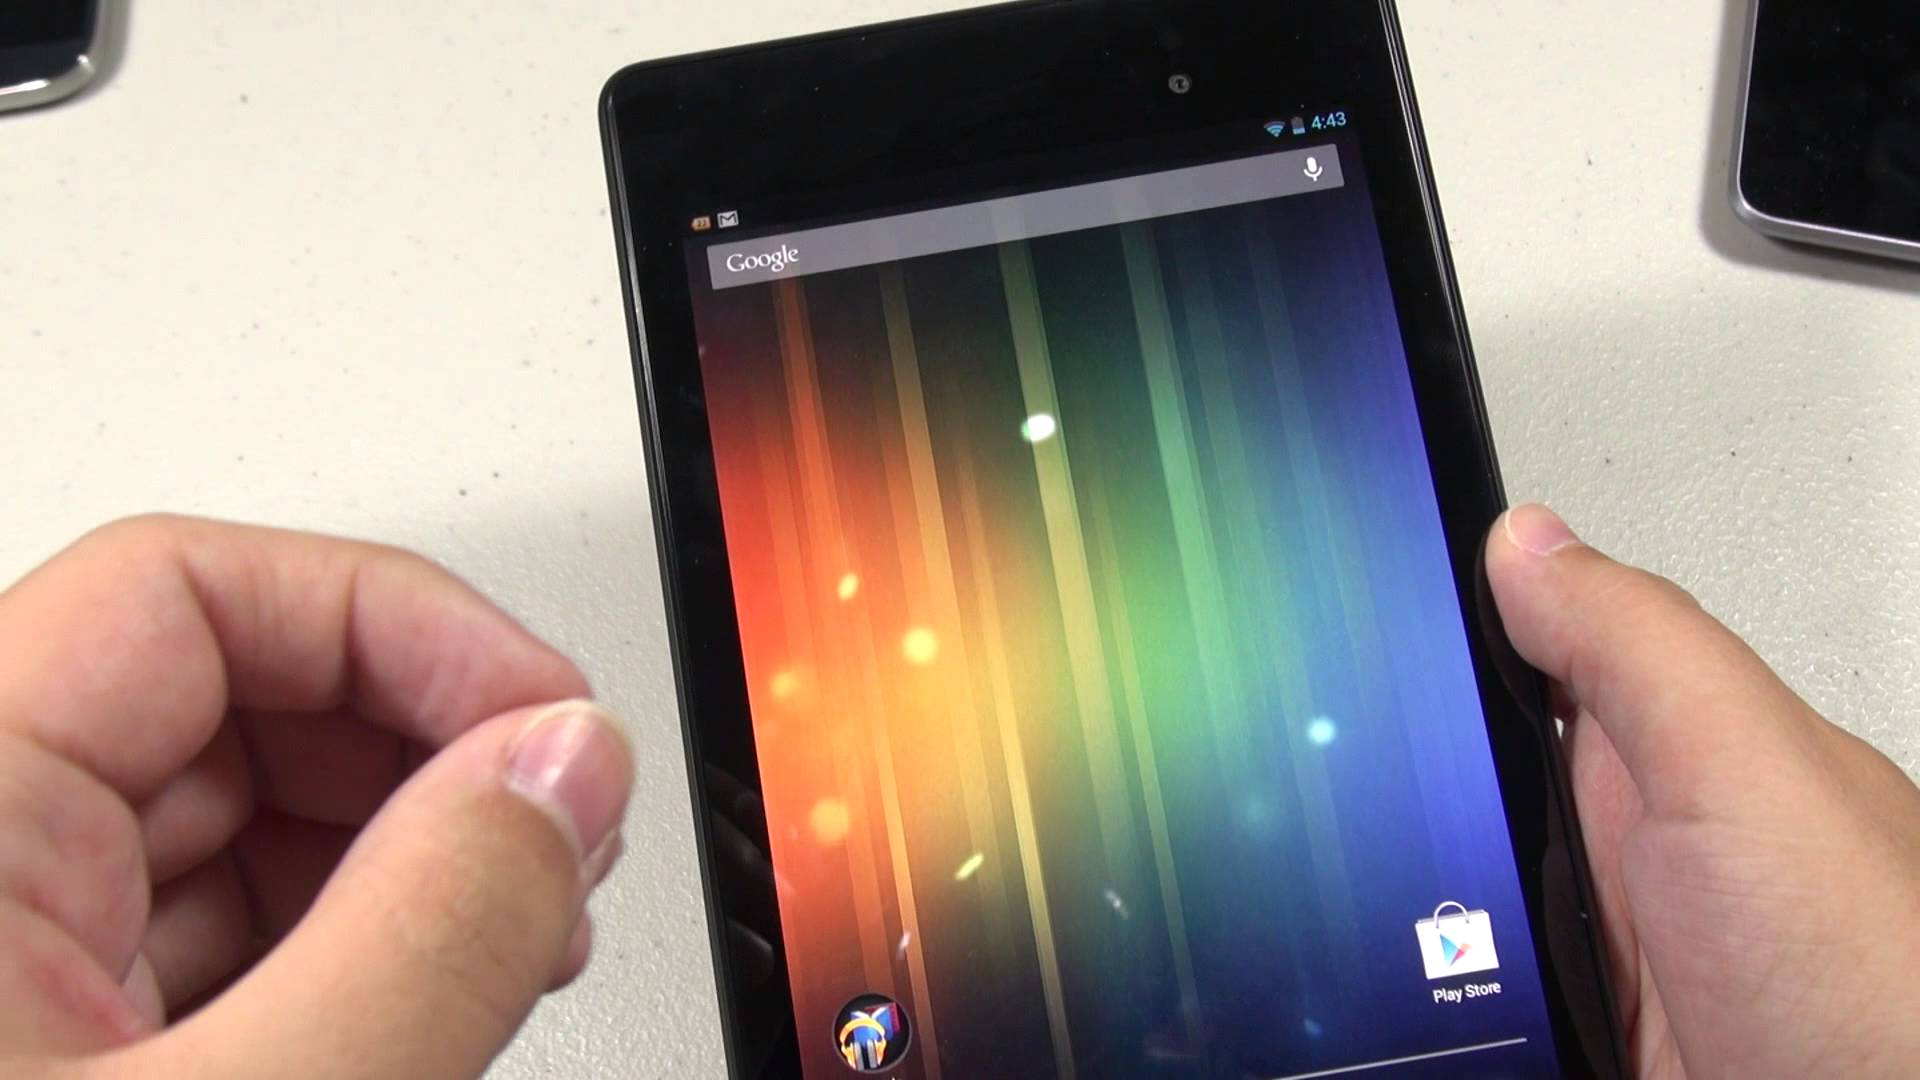 NEXUS 7 (2013): Review and Impressions